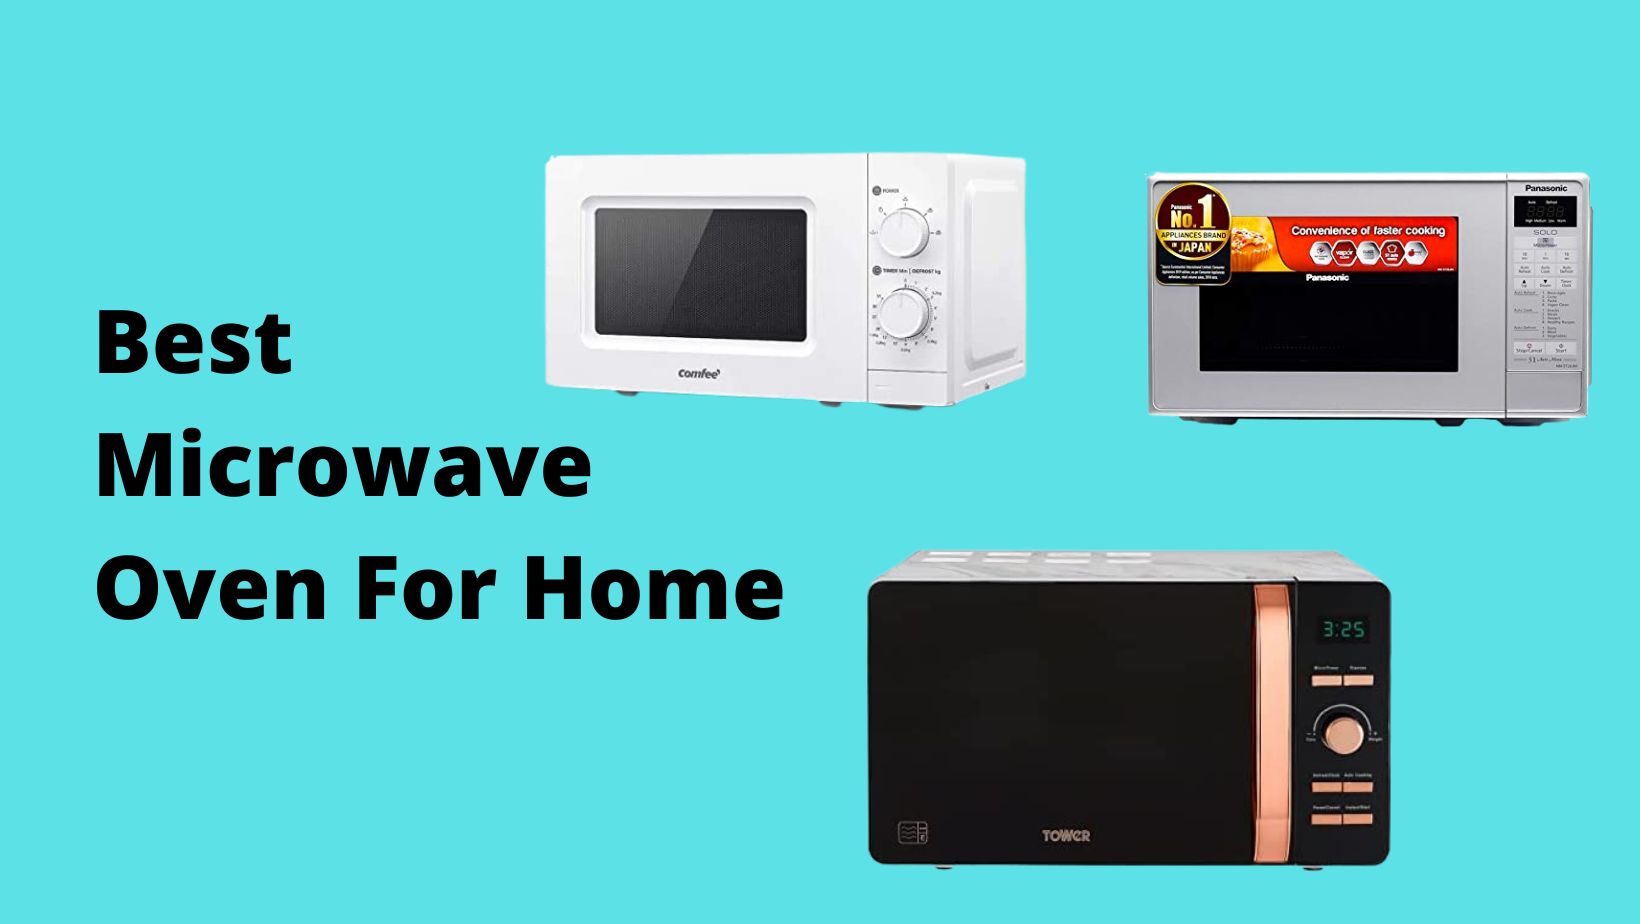 Best Microwave Oven For Home